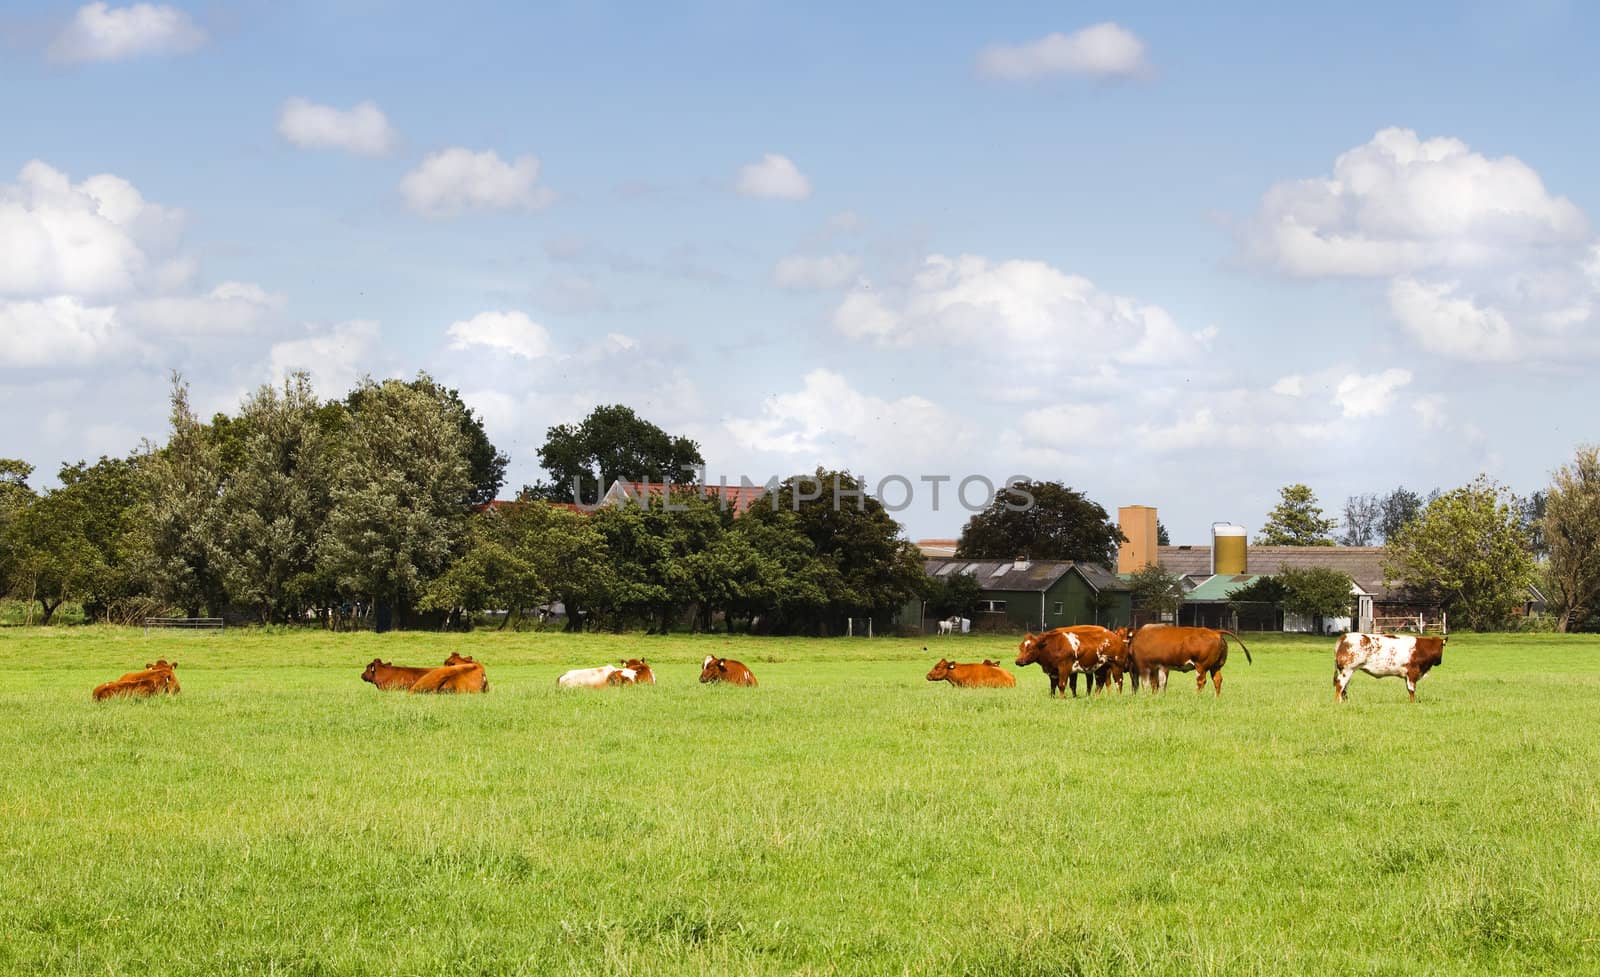 Countrylandscape in summer with cows by Colette